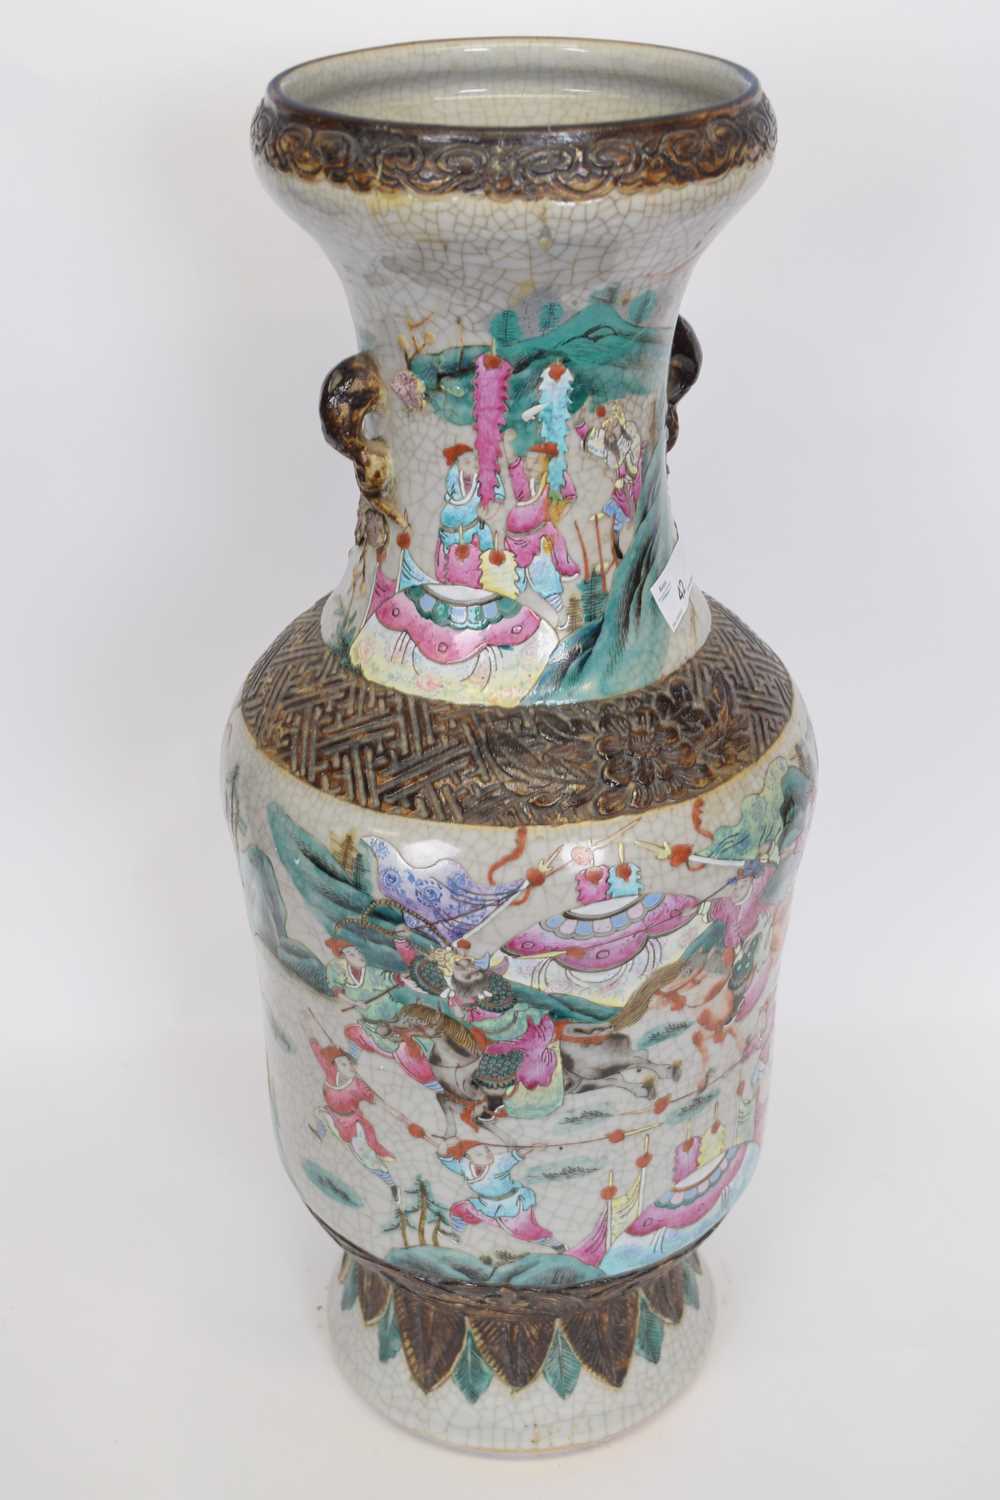 Chinese Crackle Ware Vase - Image 3 of 3